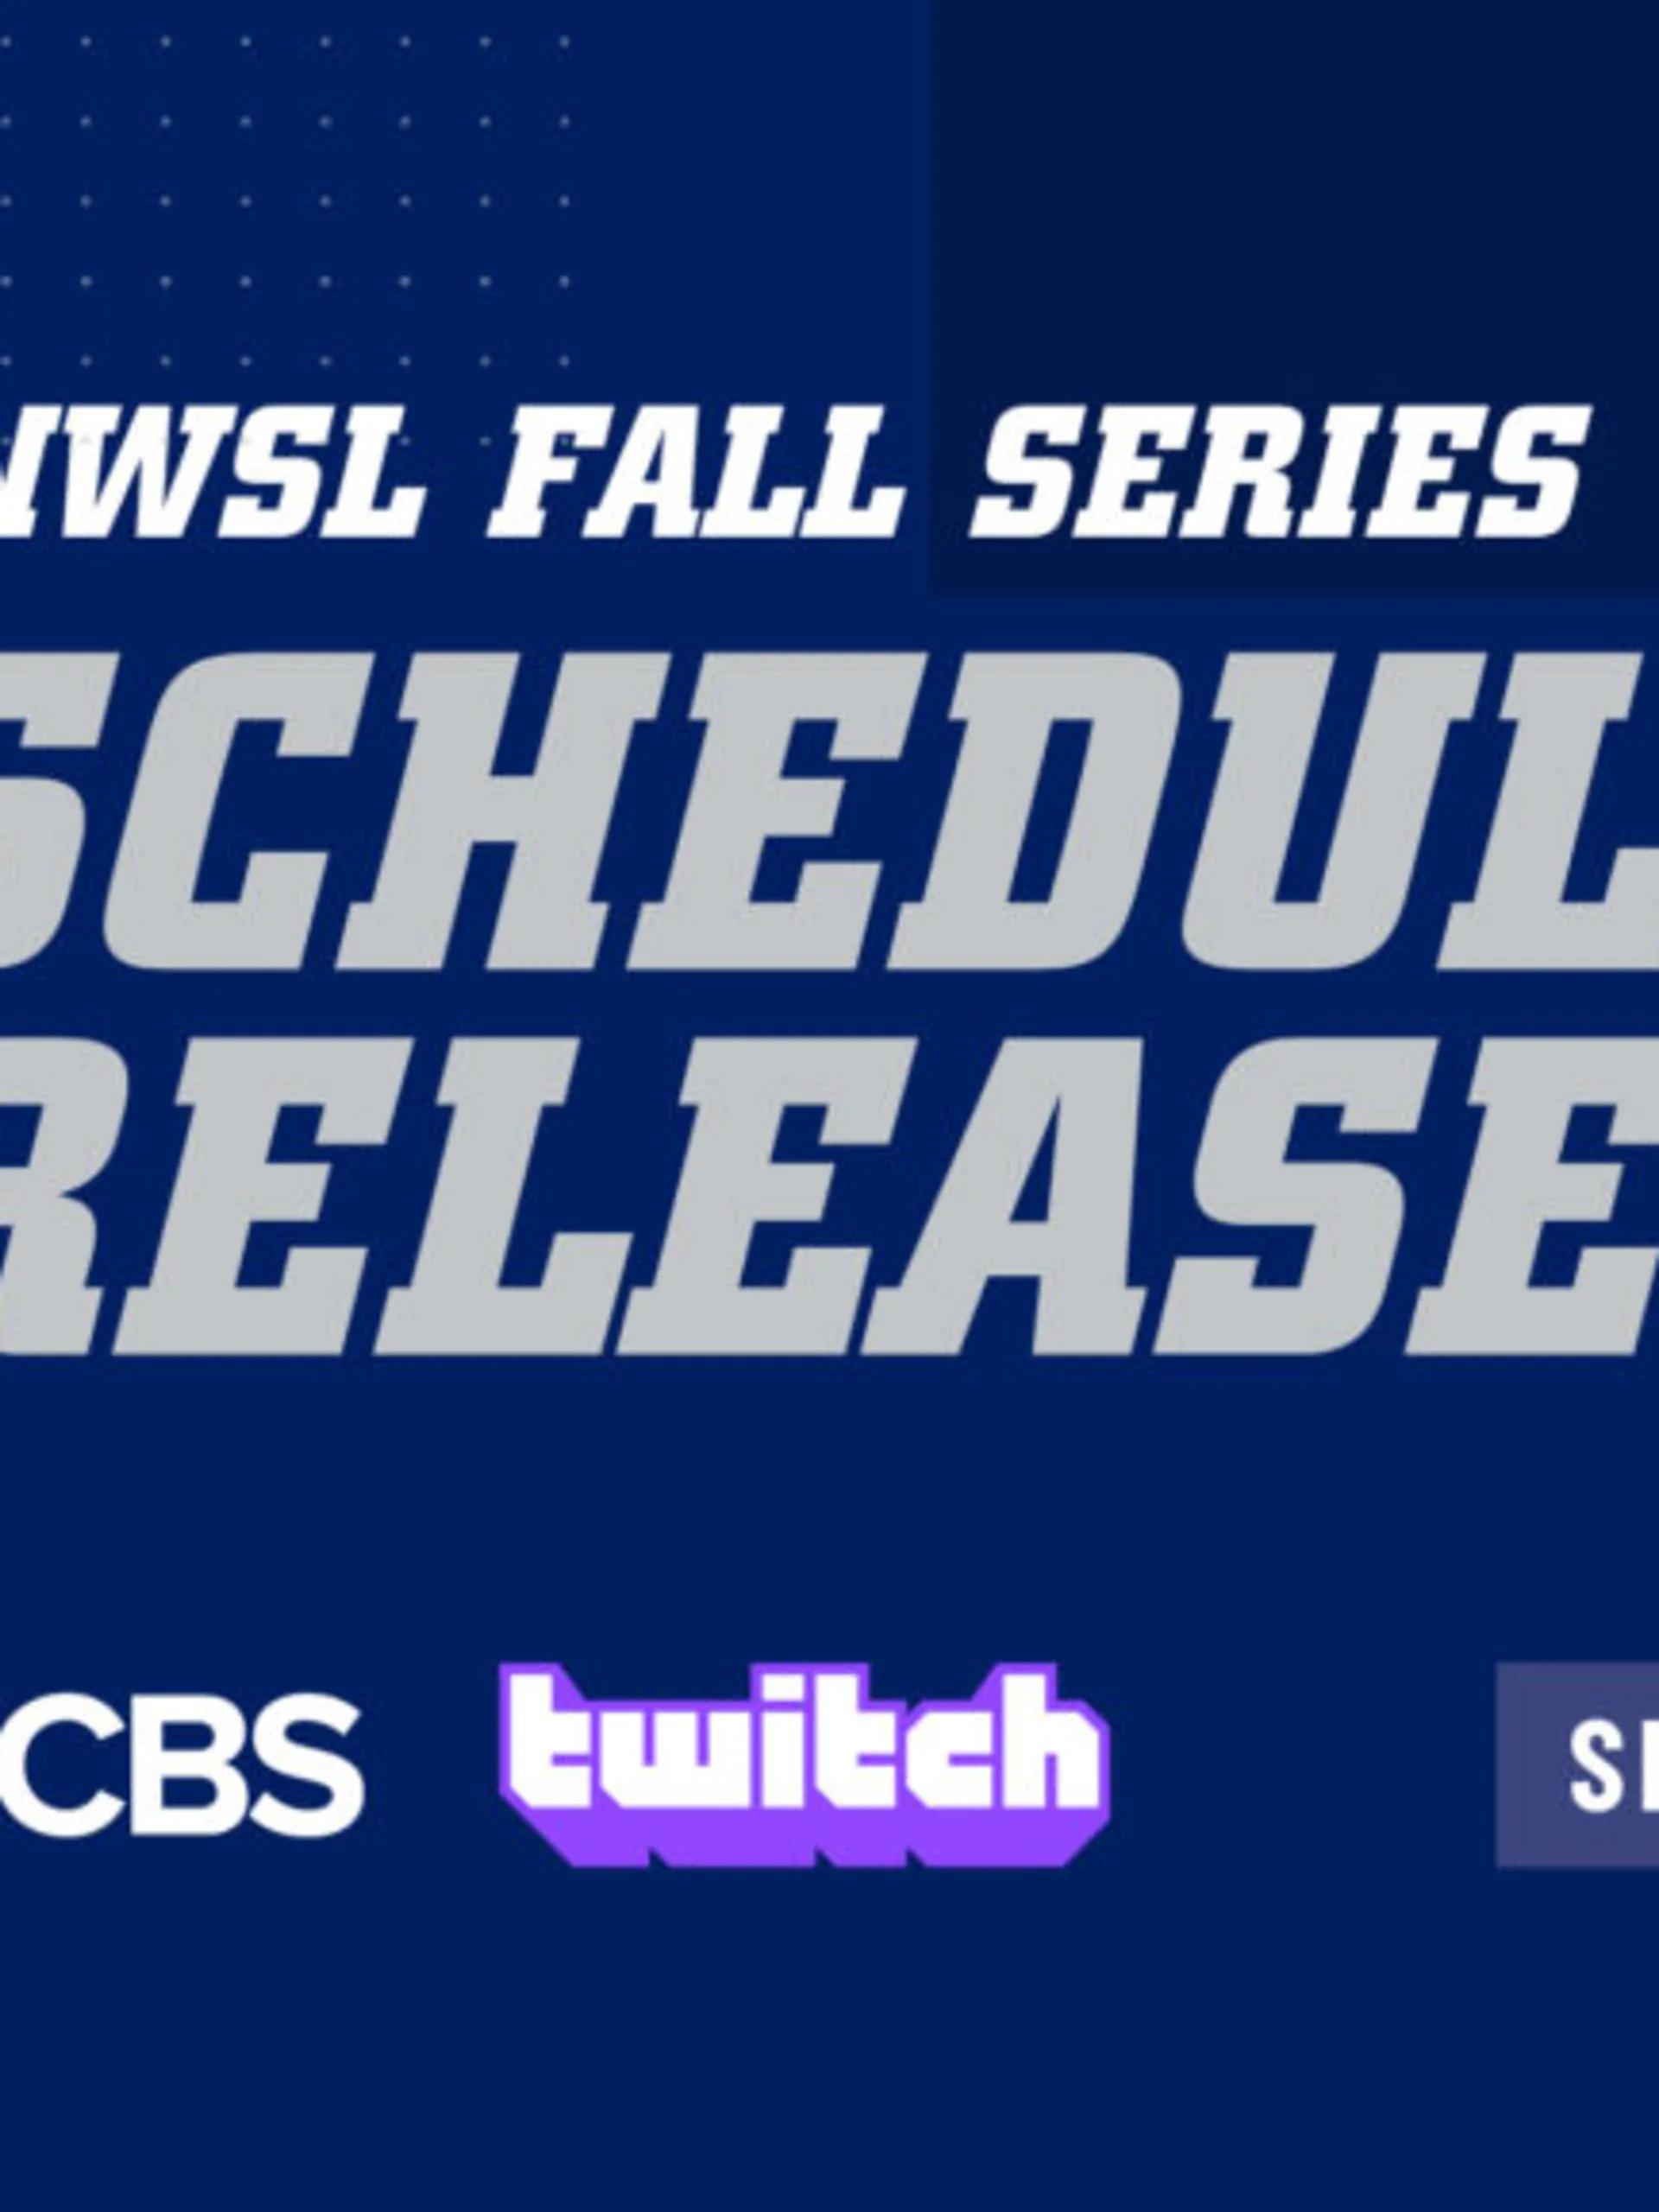 story-image-nwsl-2020-fall-series-schedule-highlights-regional-rivalries-innovative-solutions